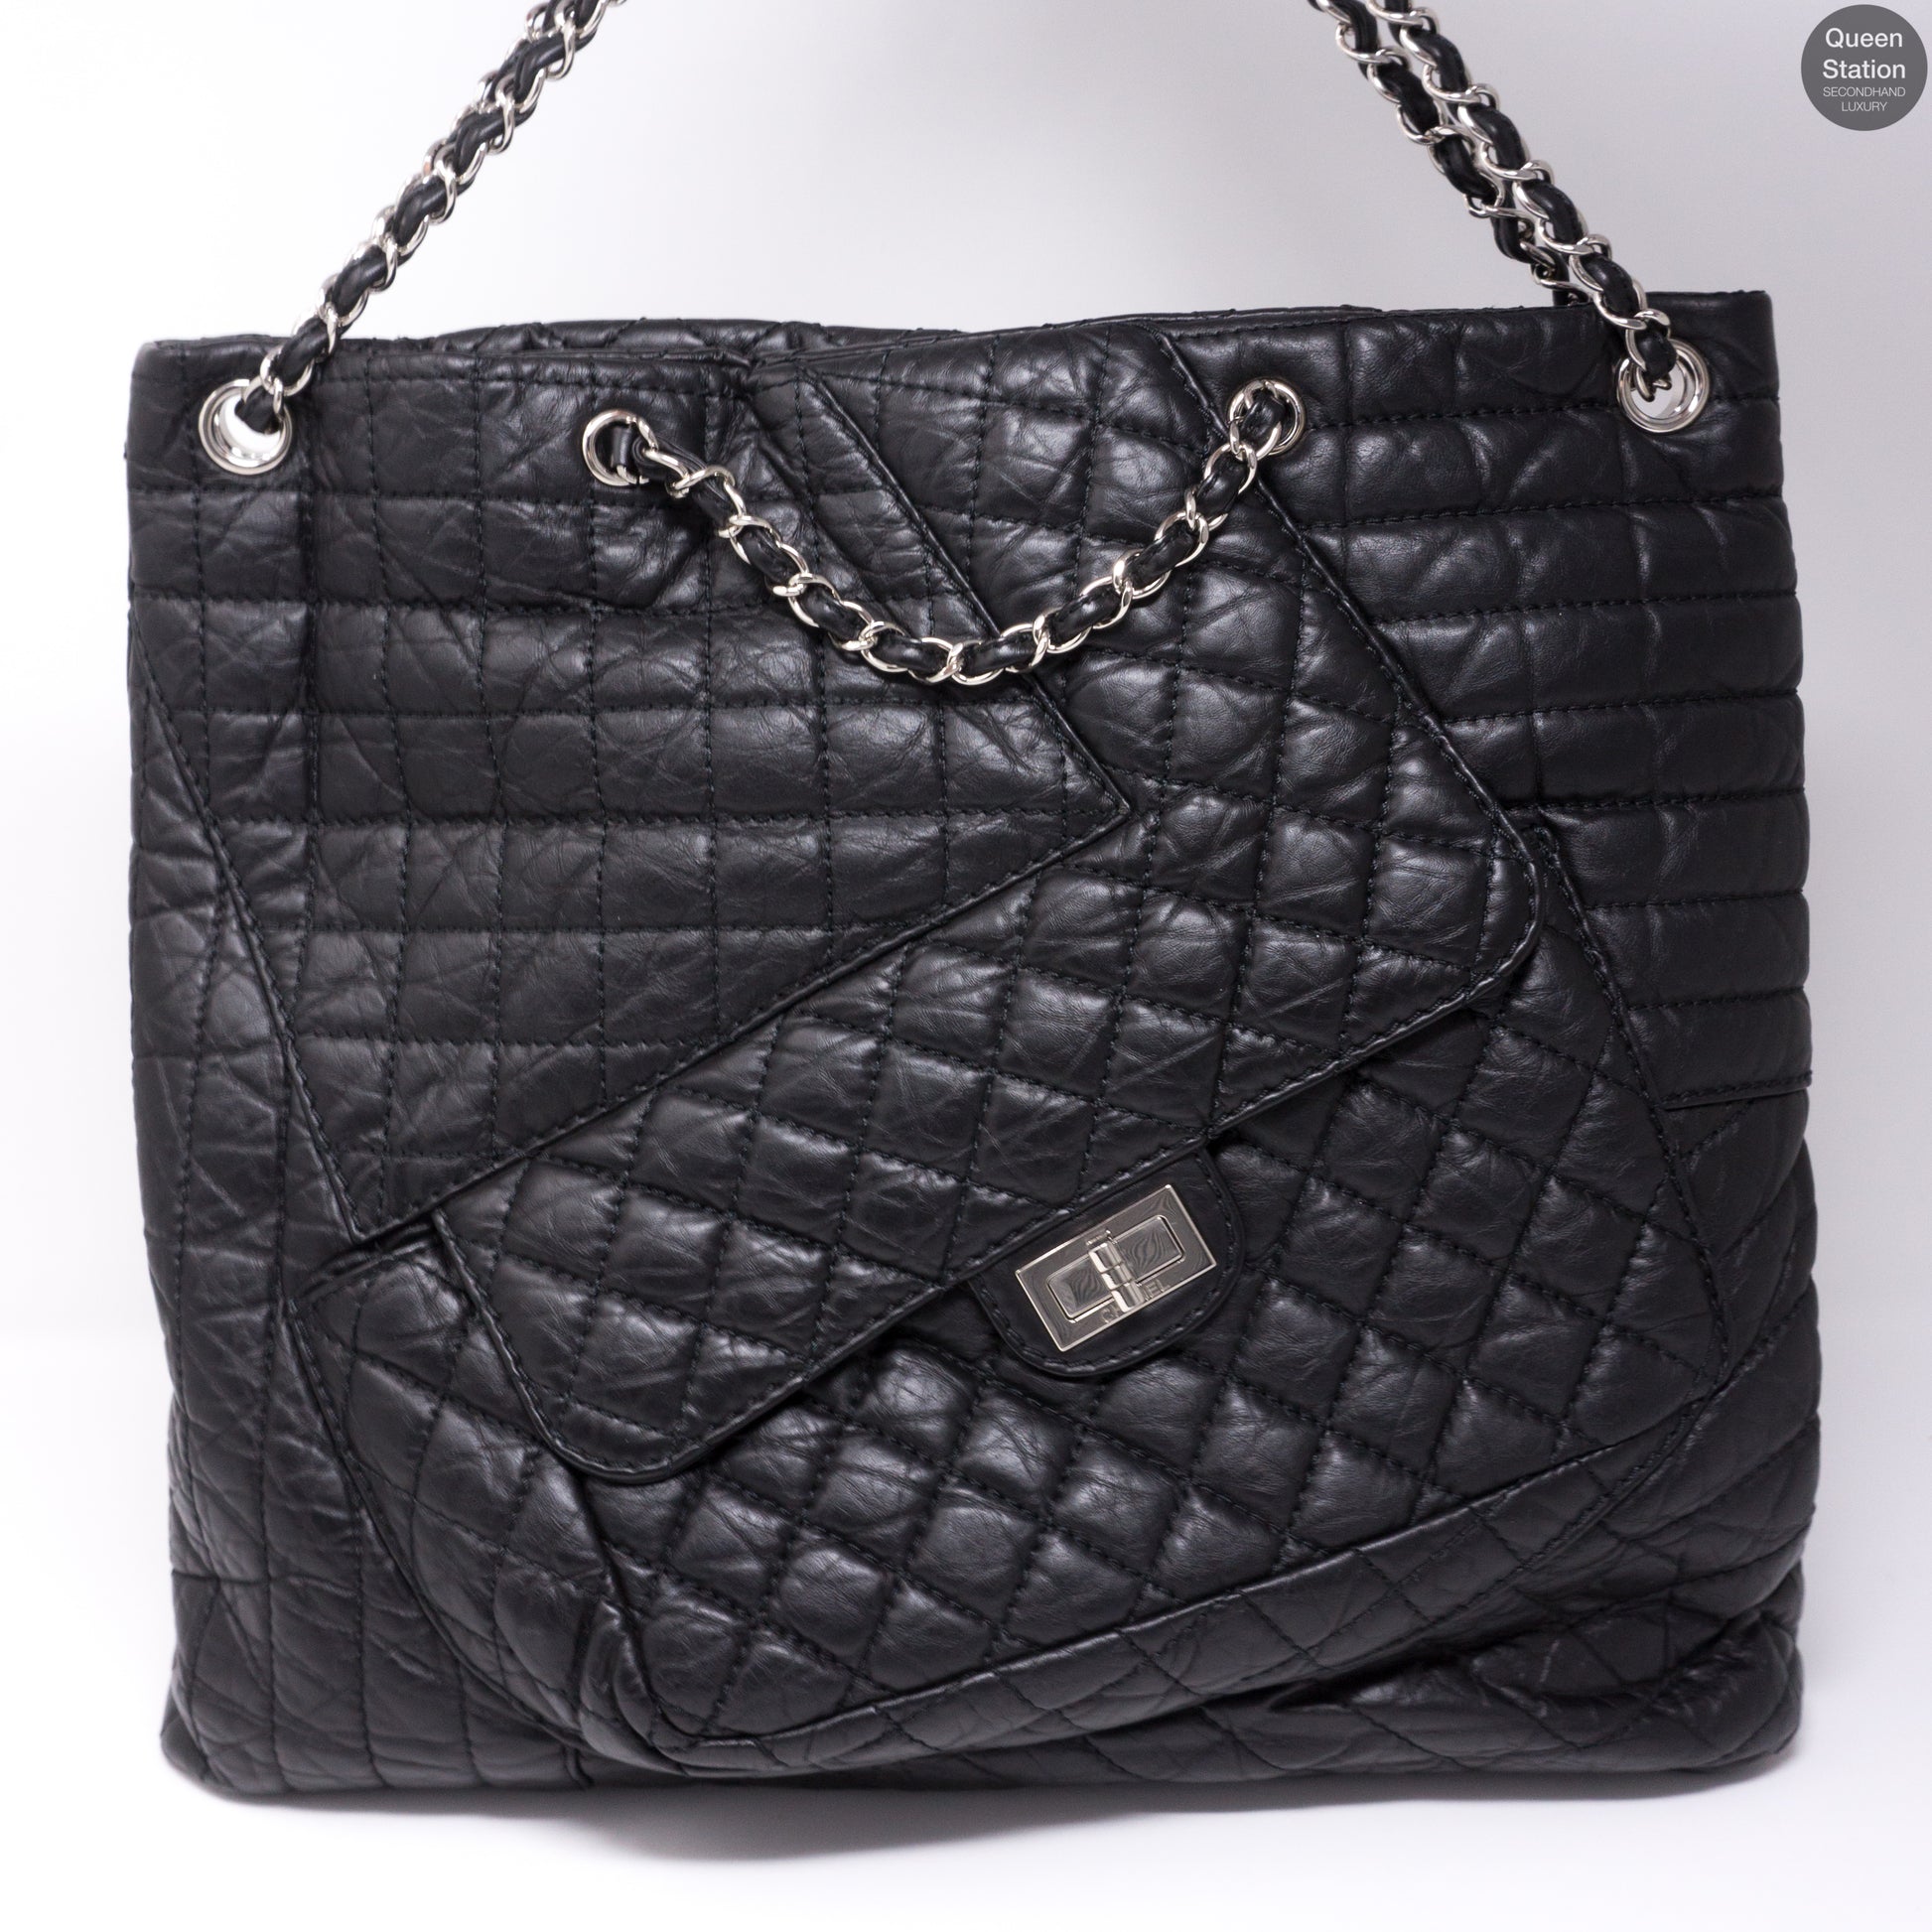 CHANEL 10A NWT AUTHENTIC JUMBO XL QUILTED LEATHER FANTASY FUR TOTE